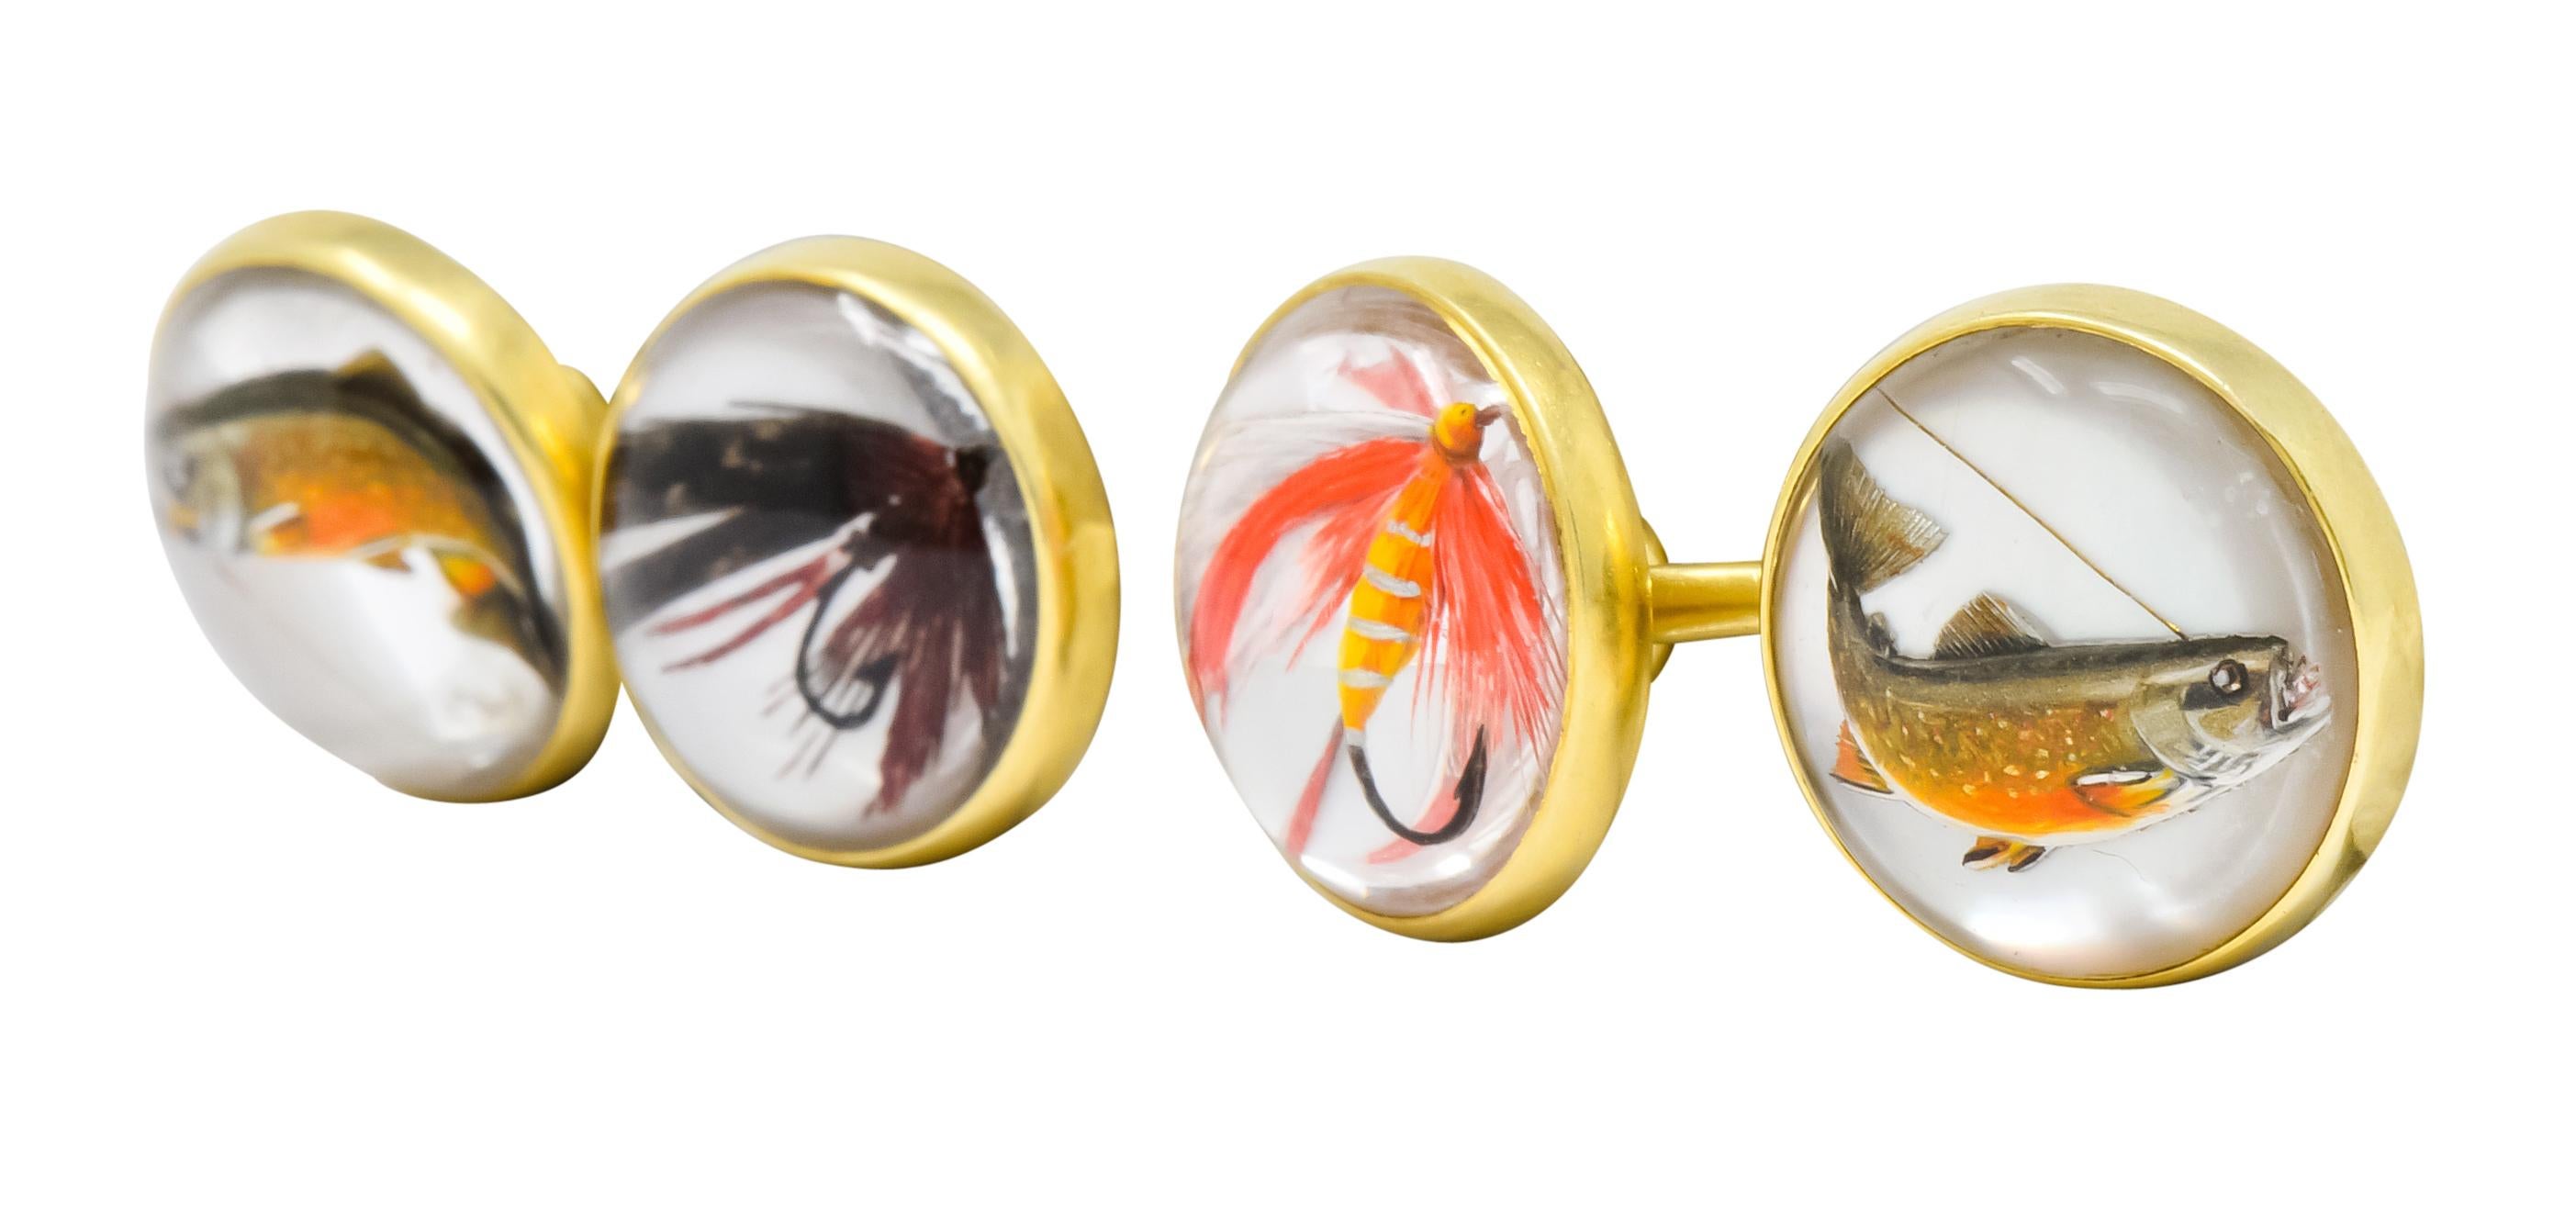 Link style cufflinks featuring a round, transparent rock crystal cabochon measuring approximately 13 mm, bezel set, in a high polished gold surround
With a reverse carved, hand-painted, colorful depiction of fish and feathered fly fishing